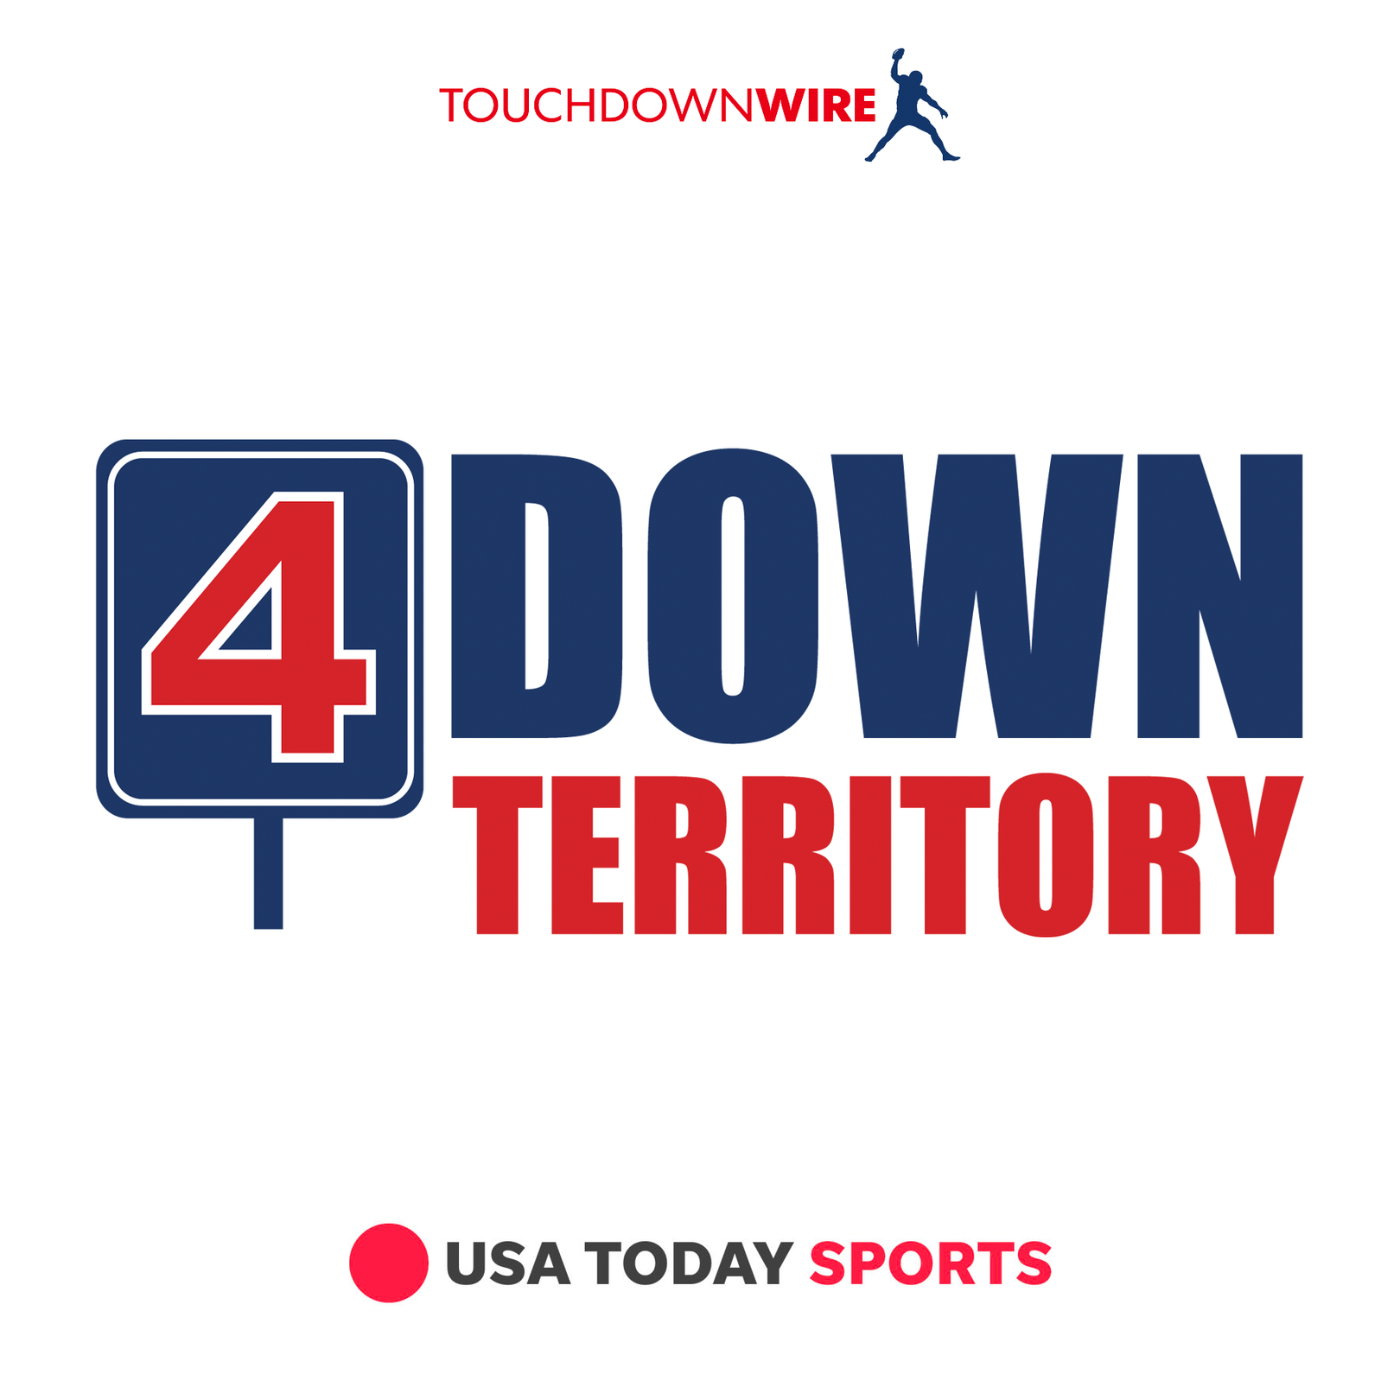 4 DOWN TERRITORY By USA Today Sports